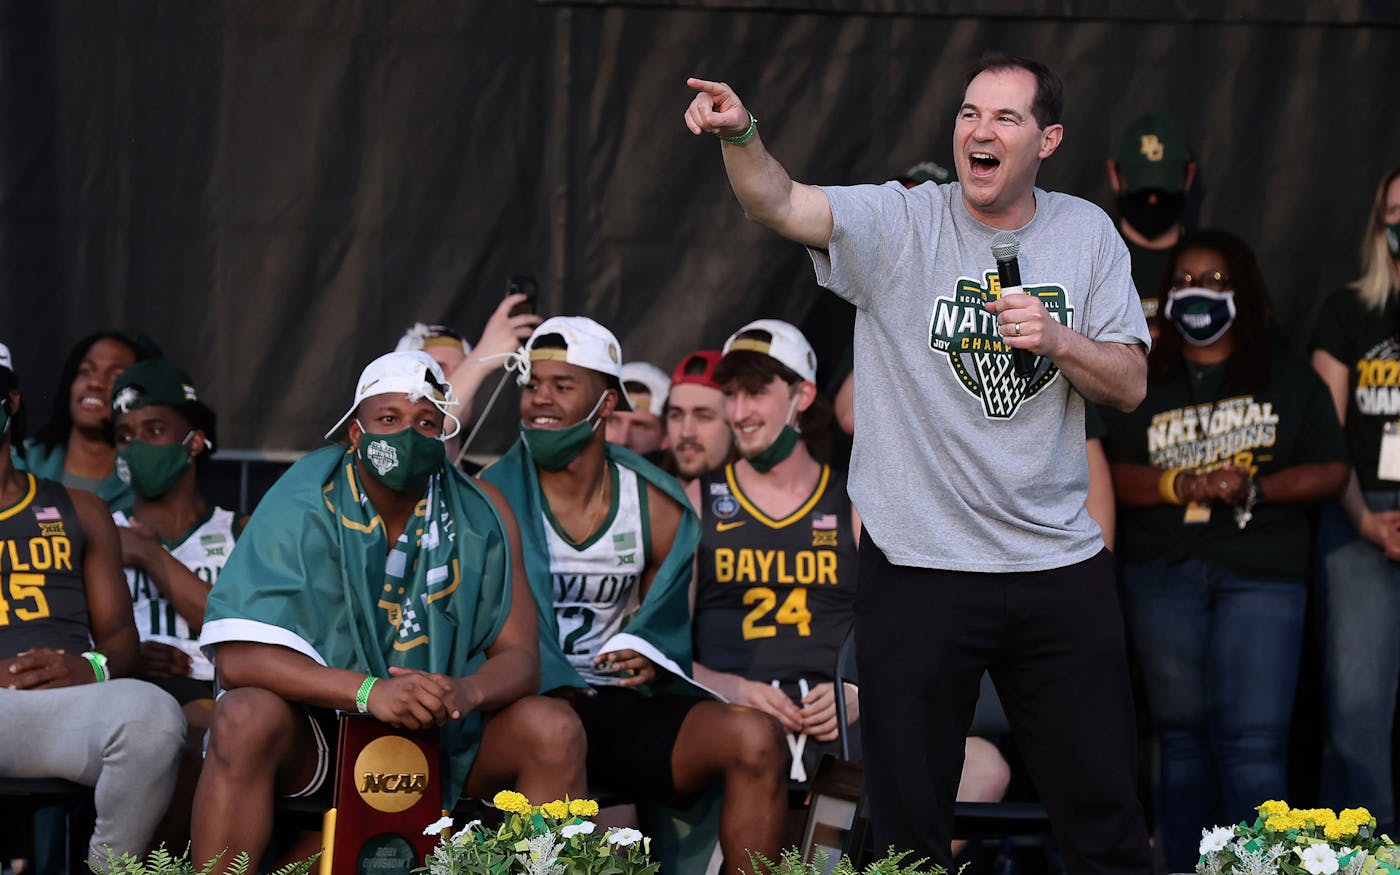 Baylor game was supposed to be 'Coach Carter' comeback movie